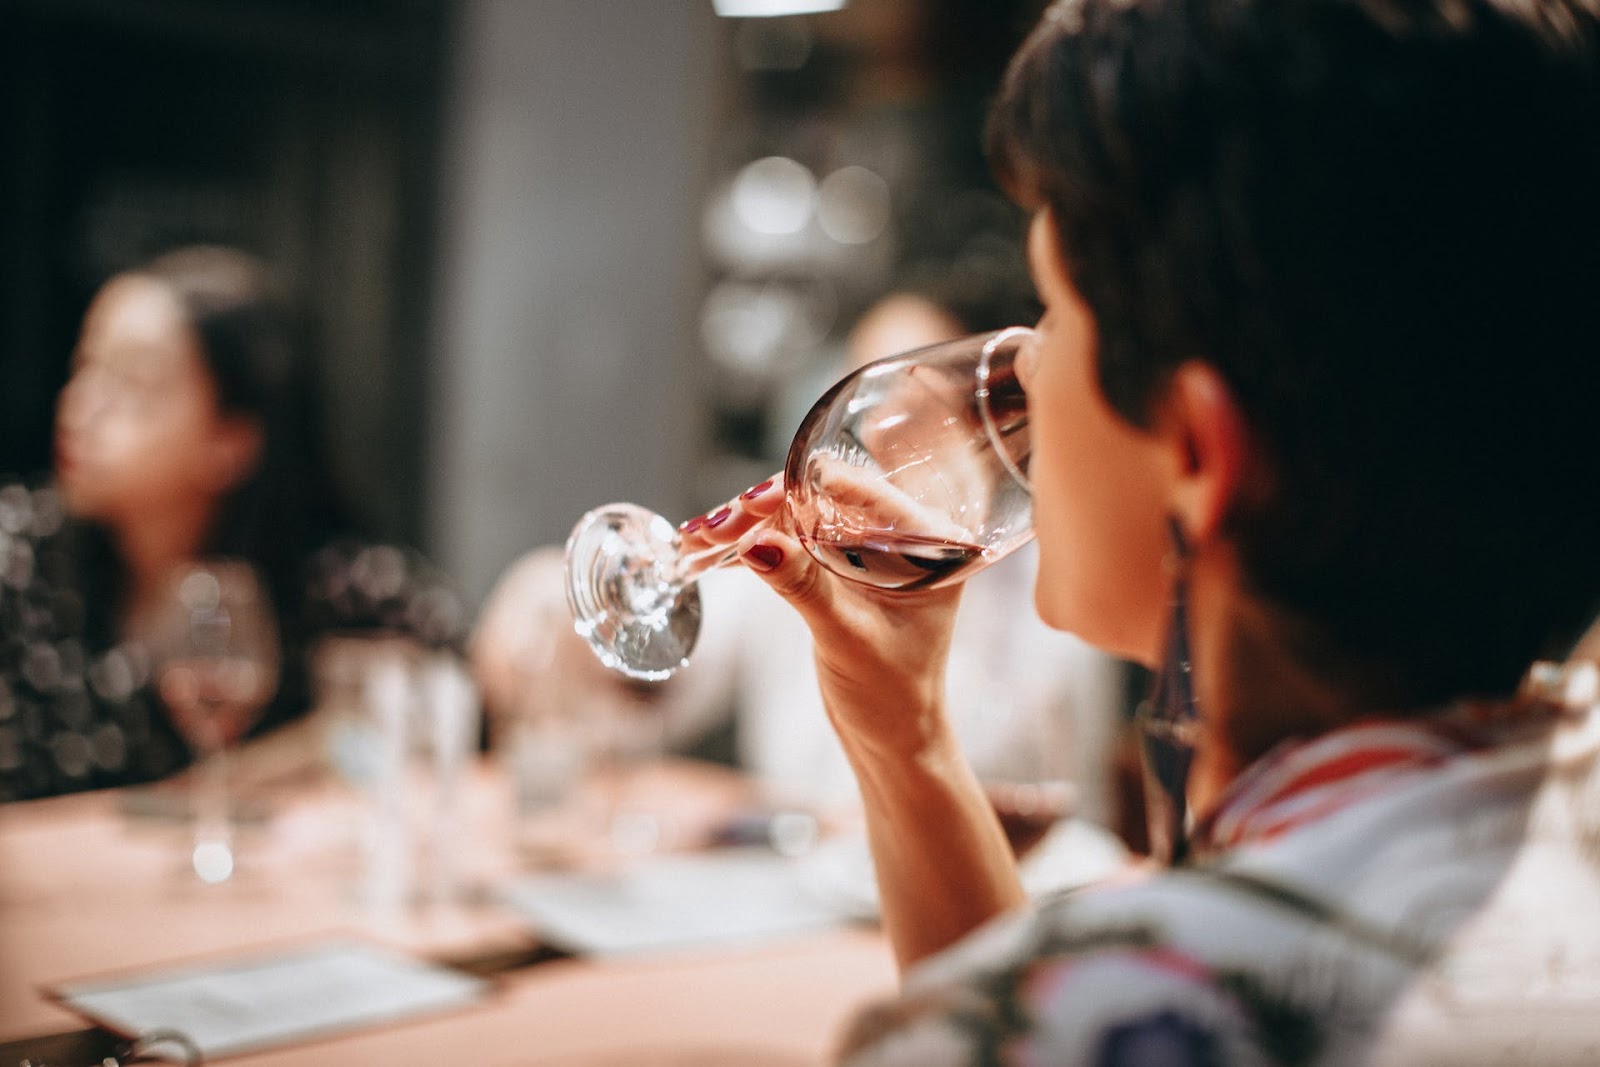 How to Use Your 5 Senses in Wine Tasting